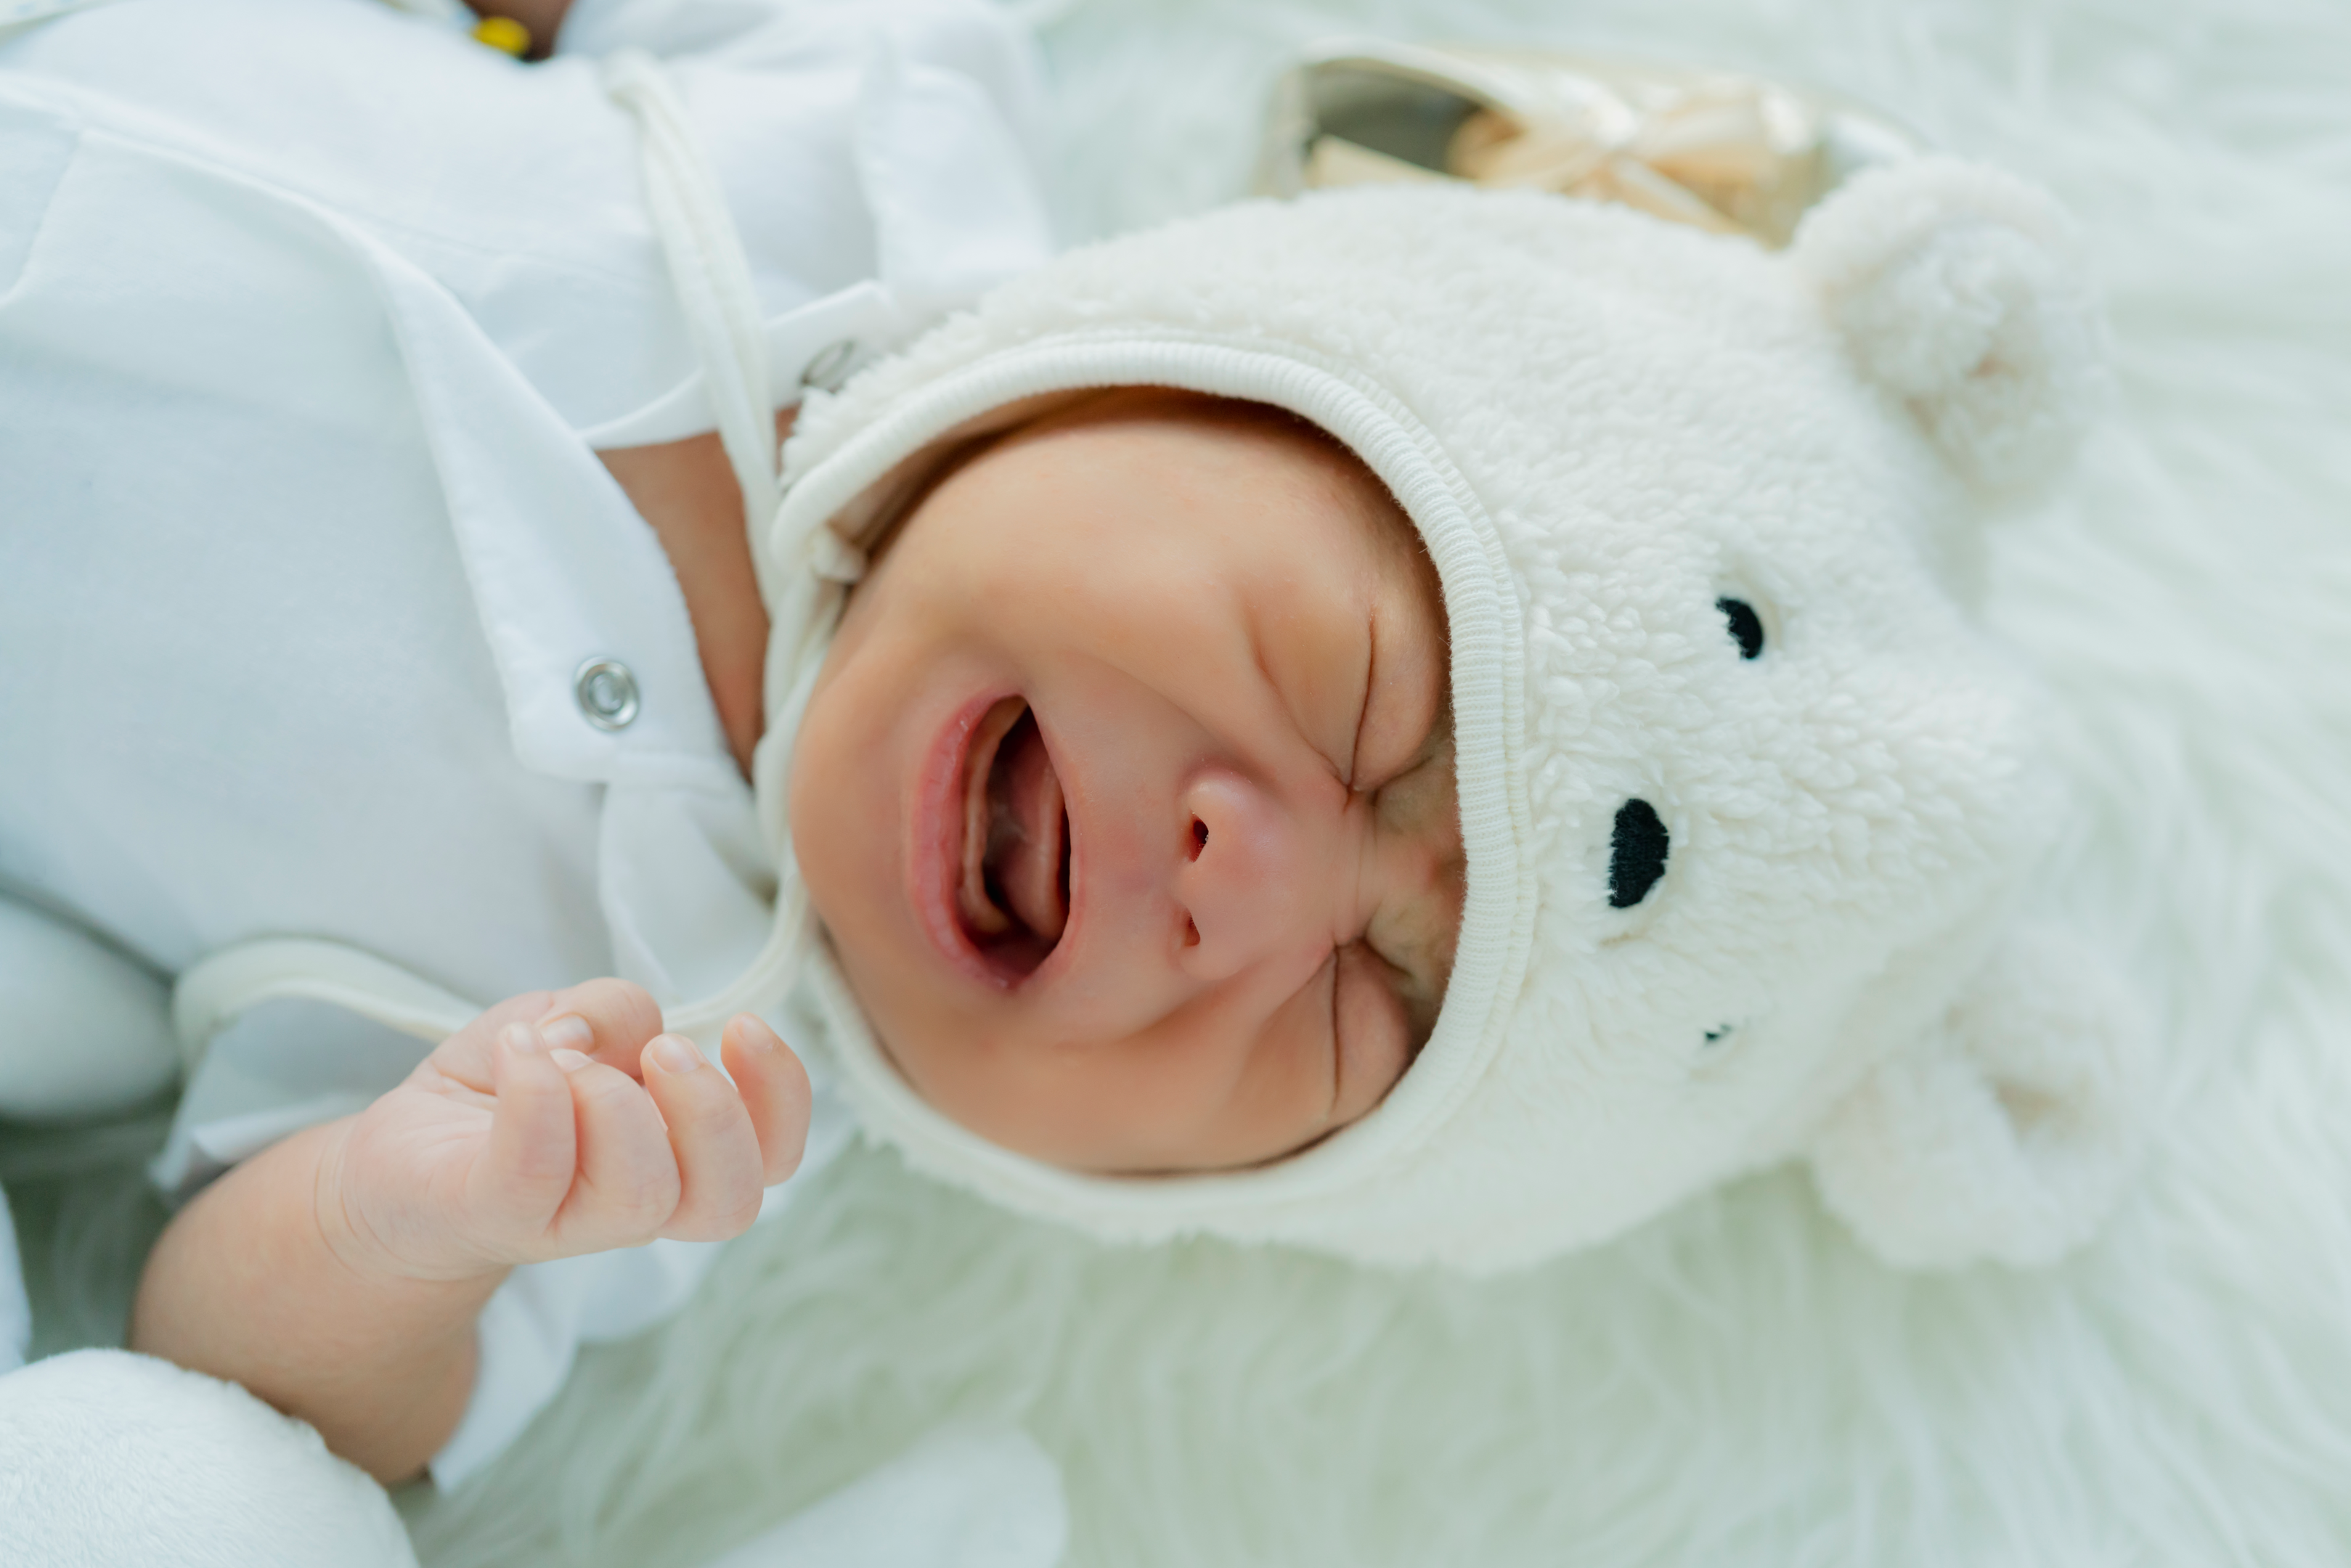 An ideal swaddle should ensure the baby's comfort during sleeping.